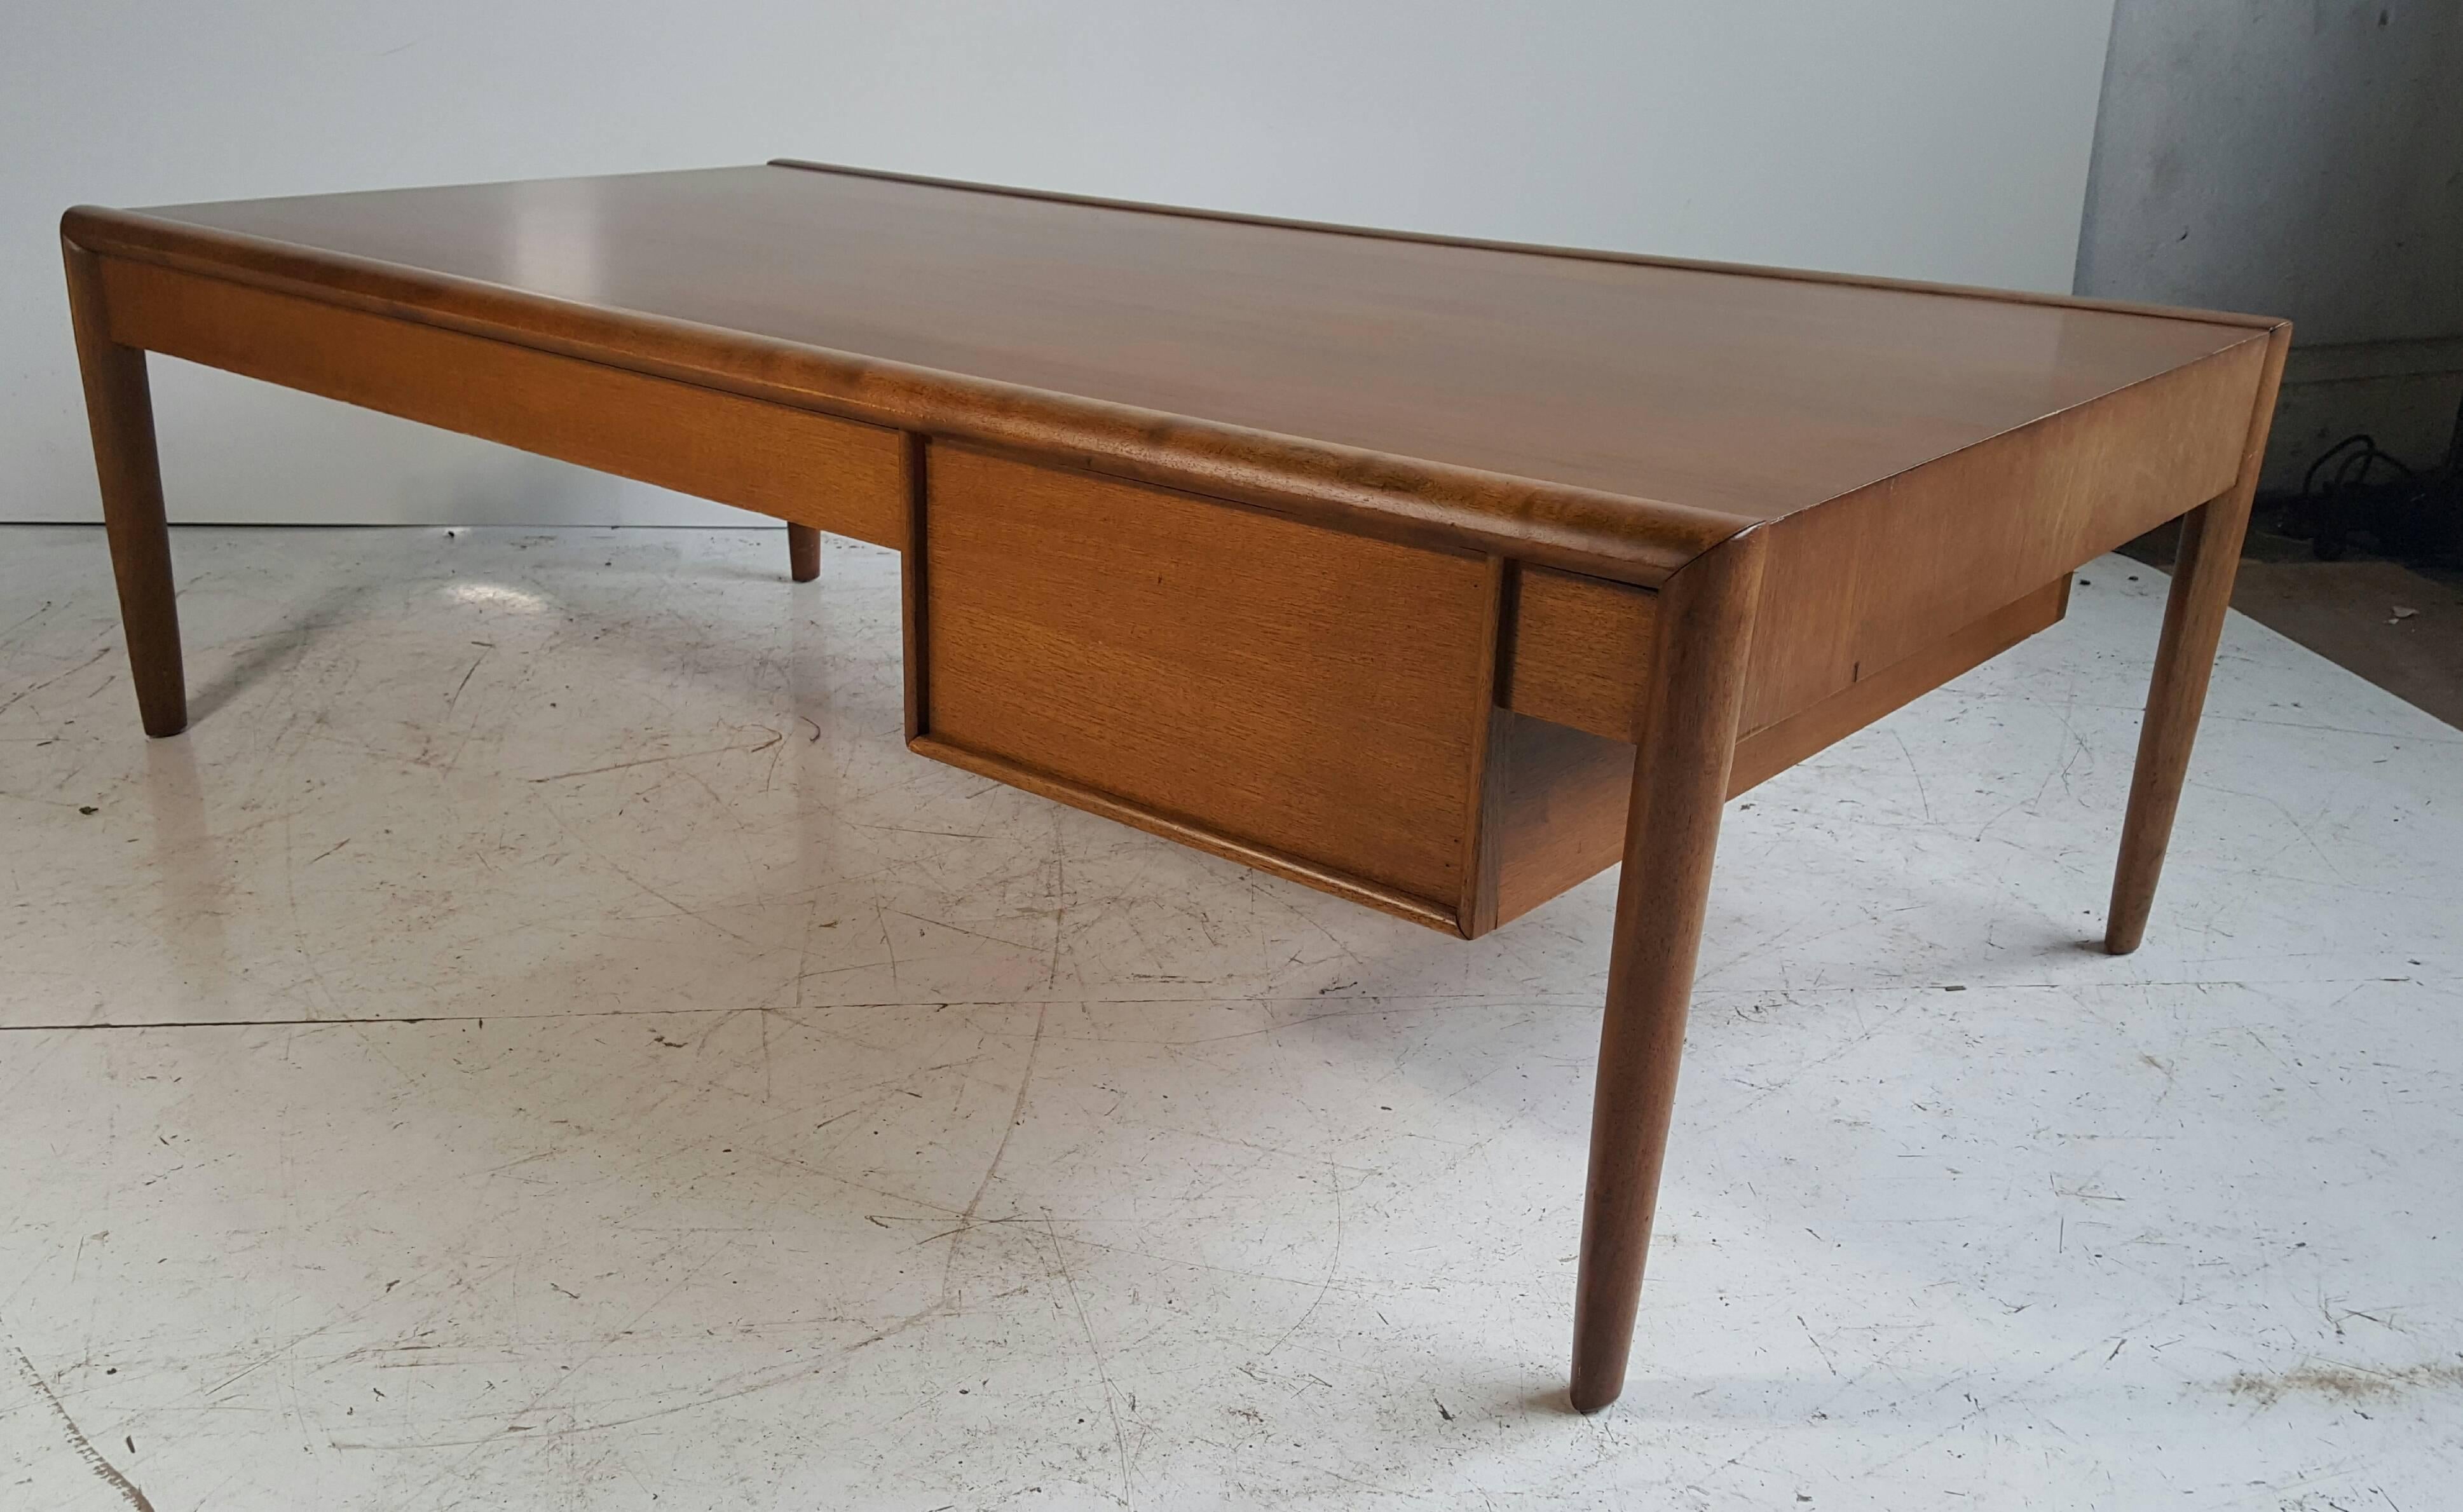 20th Century Mid-Century Modern Cocktail or Coffee Table in the Manner of Robsjohn Gibbings